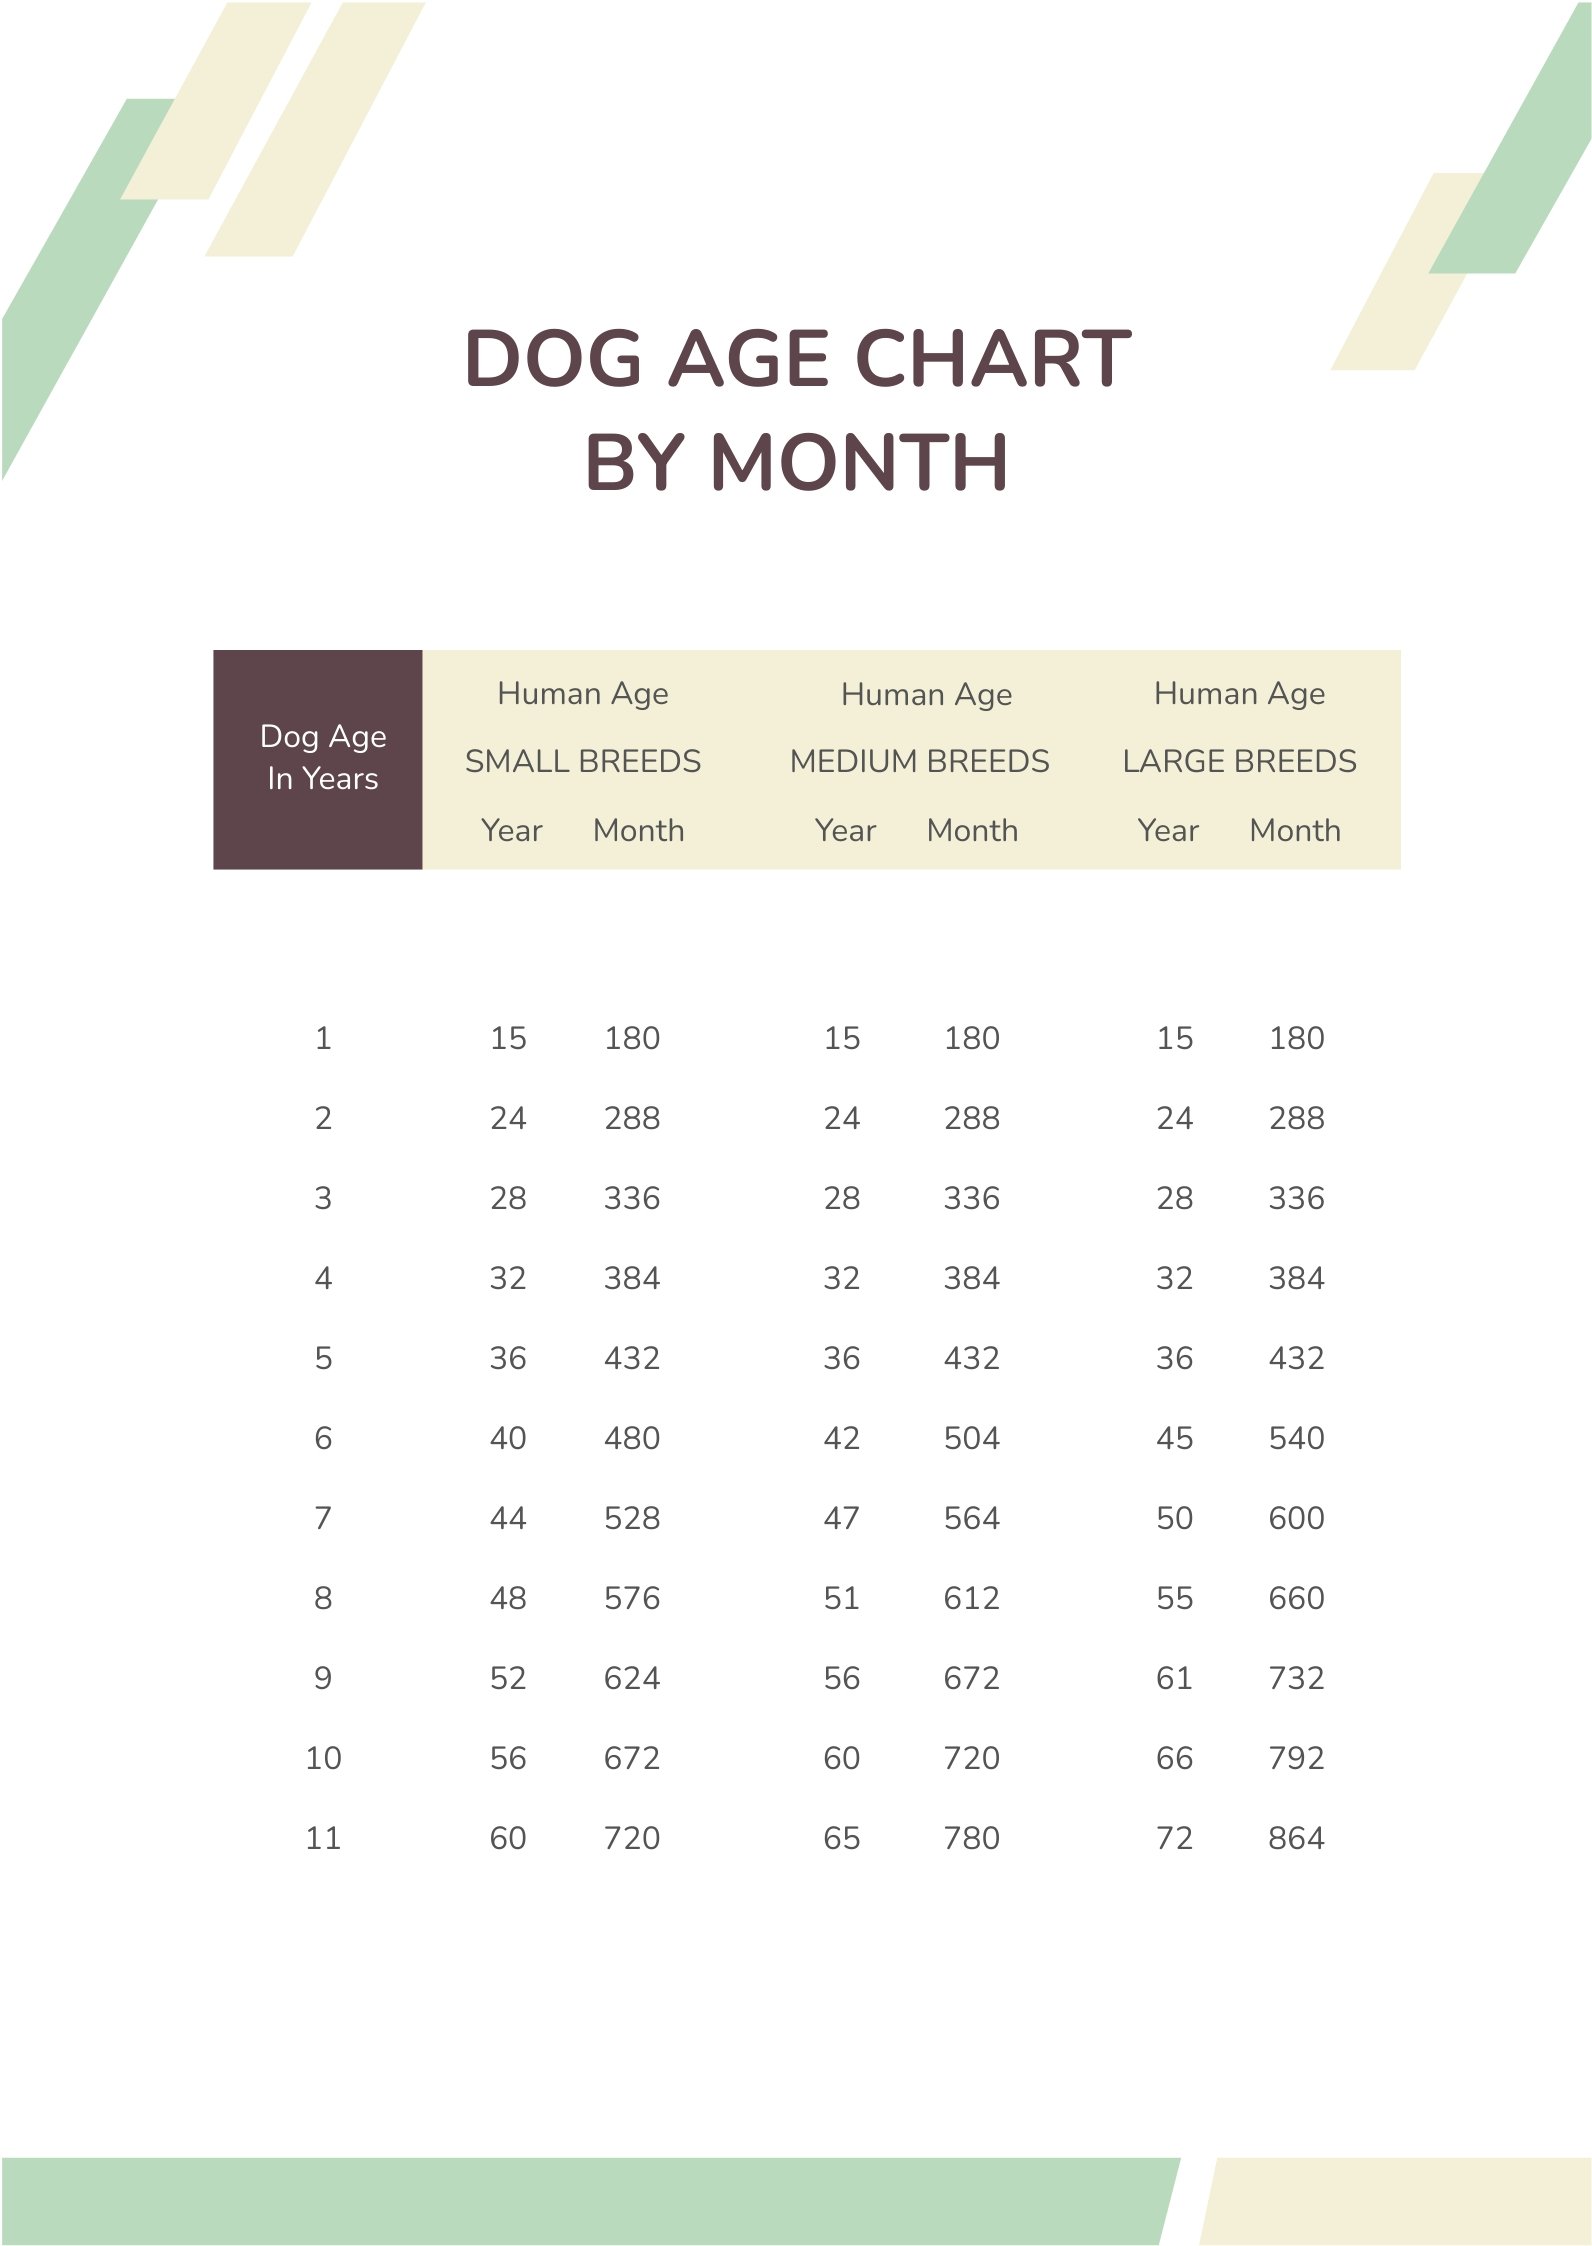 Dog Age Chart By Month in PDF